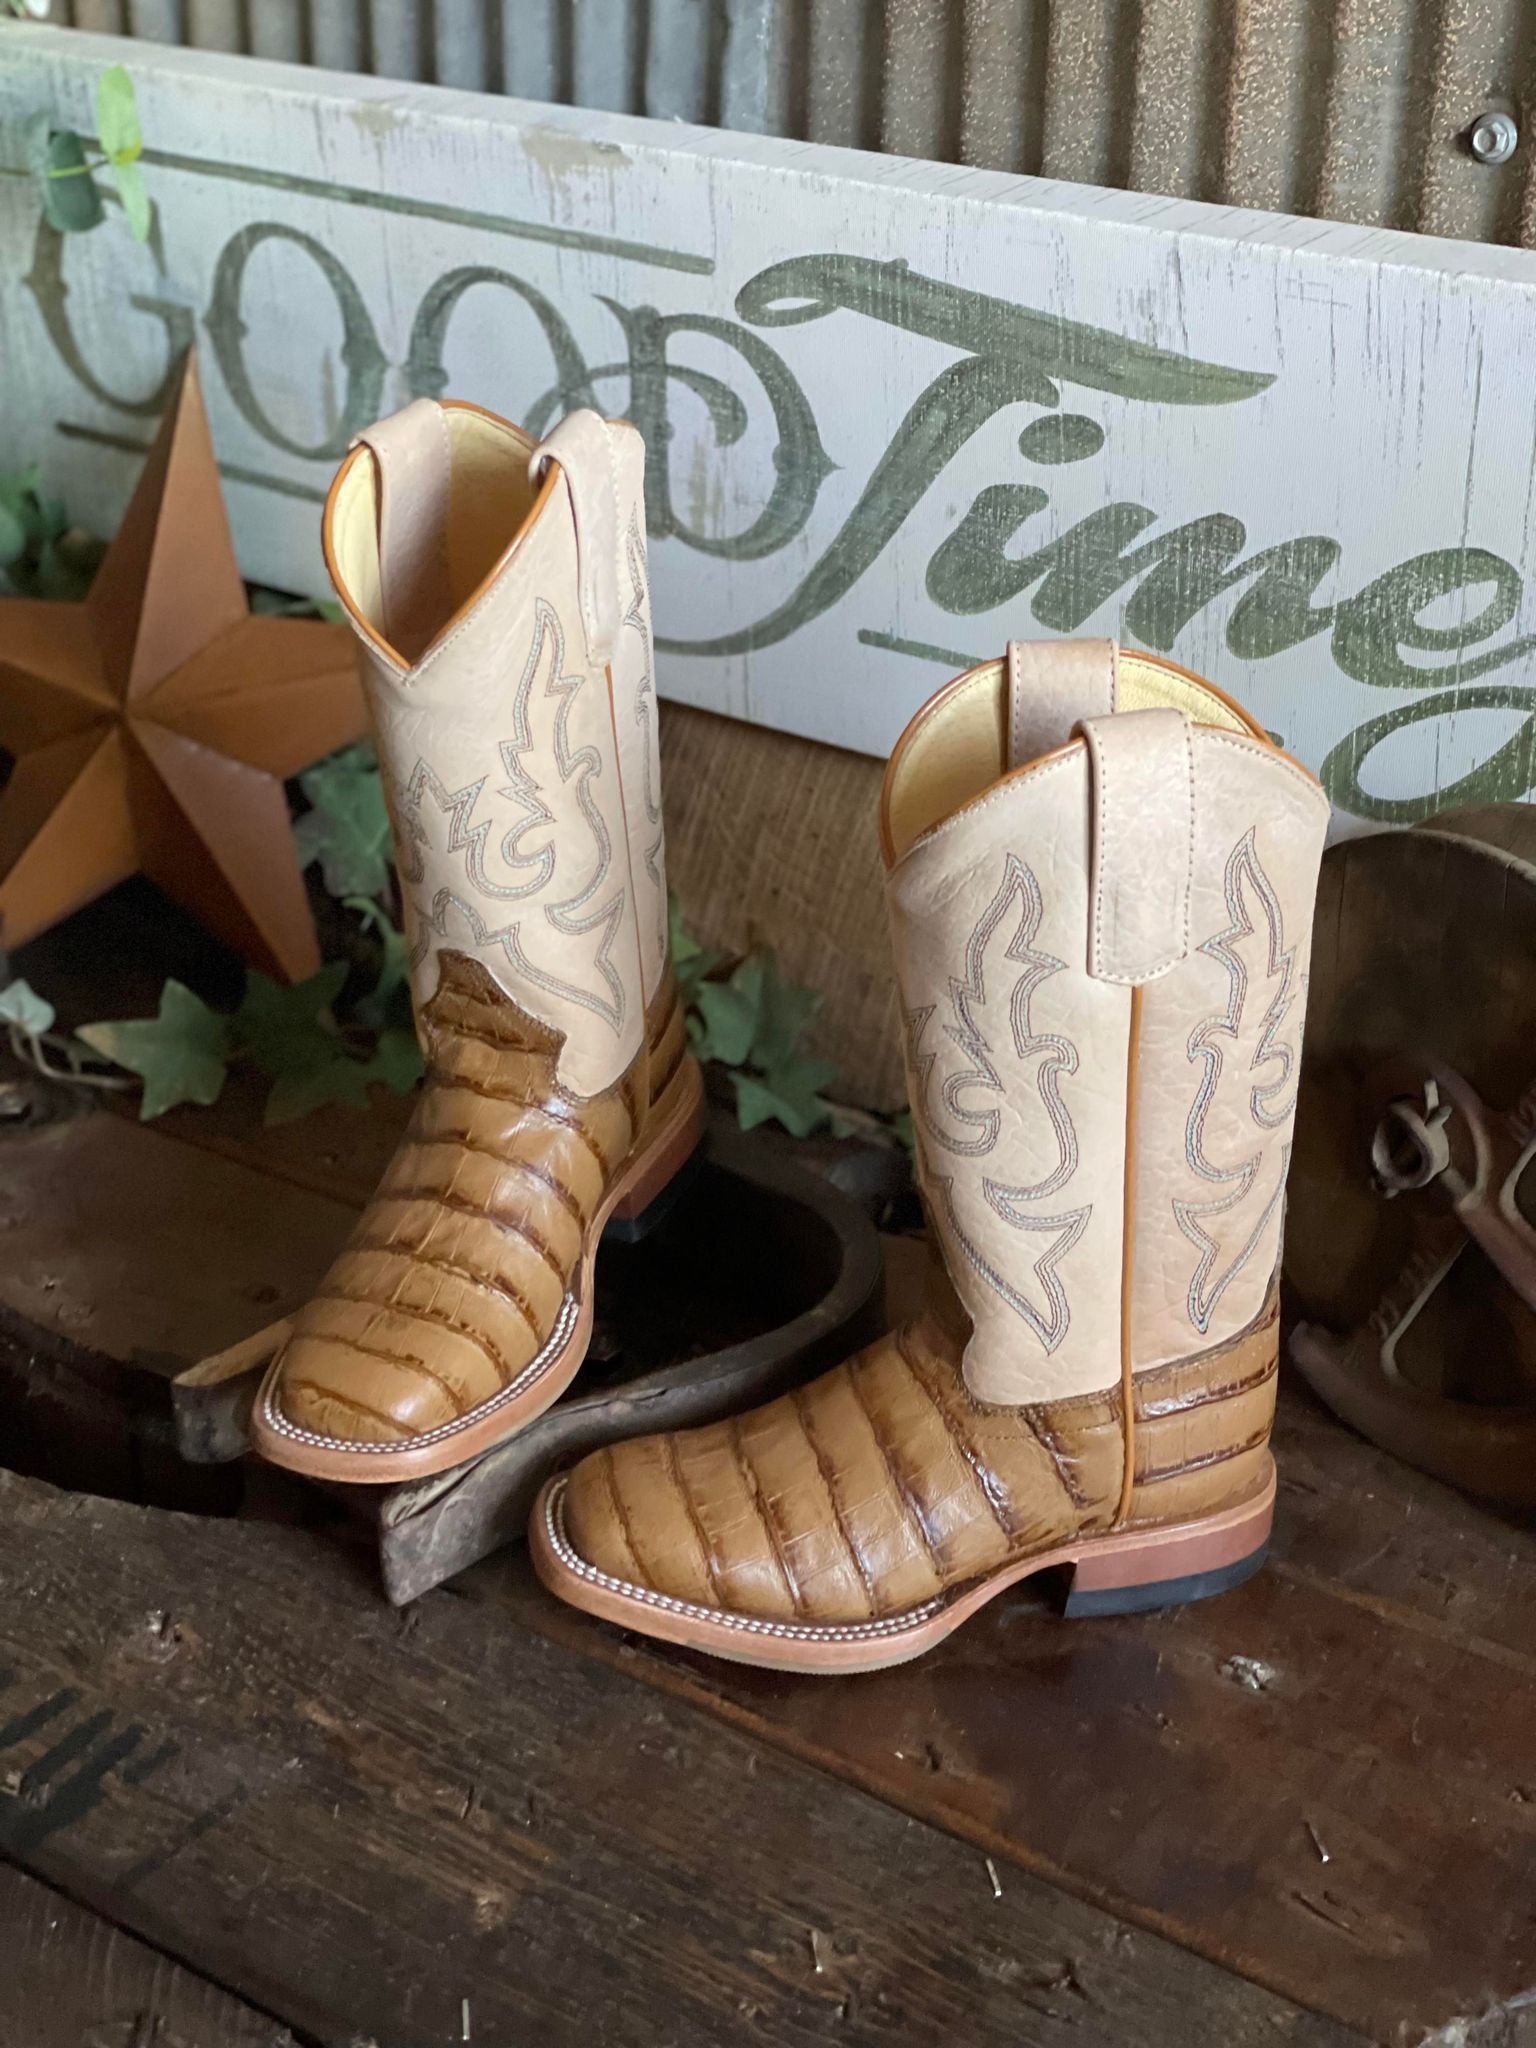 Kids Macie Bean Toasted Caiman Print Boots-Kids Boots-Anderson Bean-Lucky J Boots & More, Women's, Men's, & Kids Western Store Located in Carthage, MO